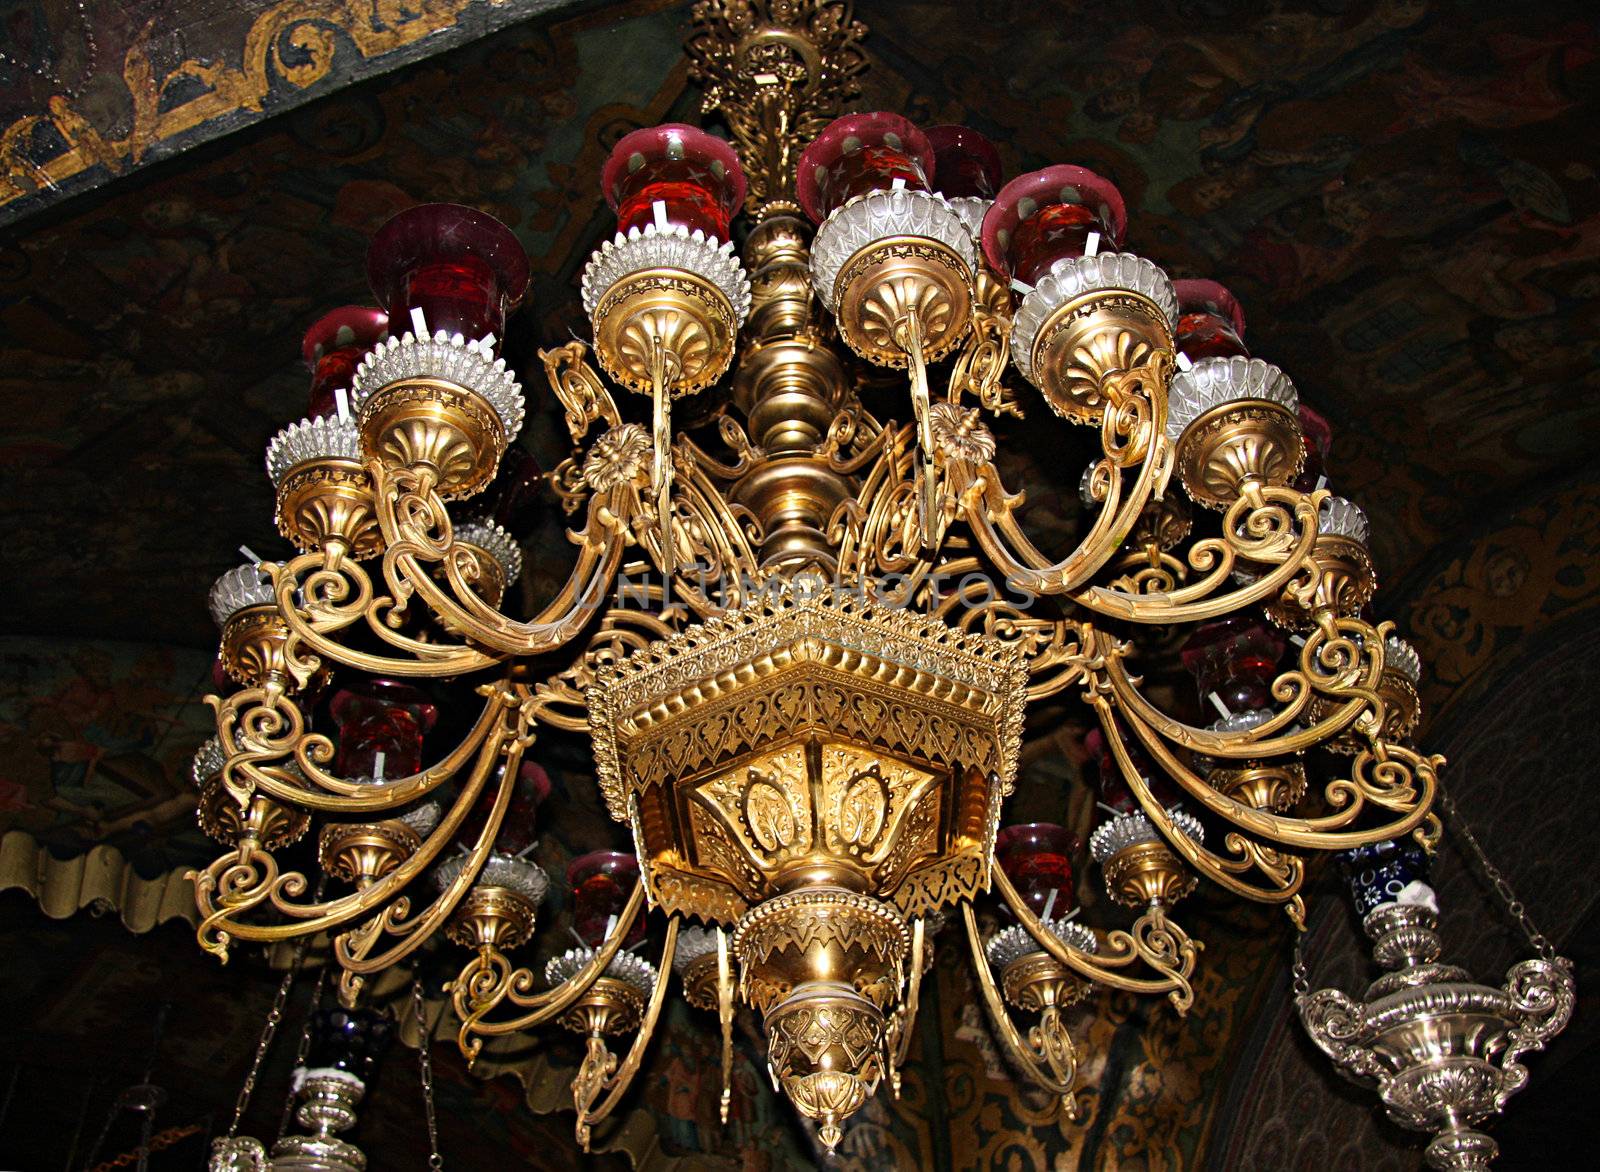 Chandelier in Church of the Holy Sepulchre, Jerusalem